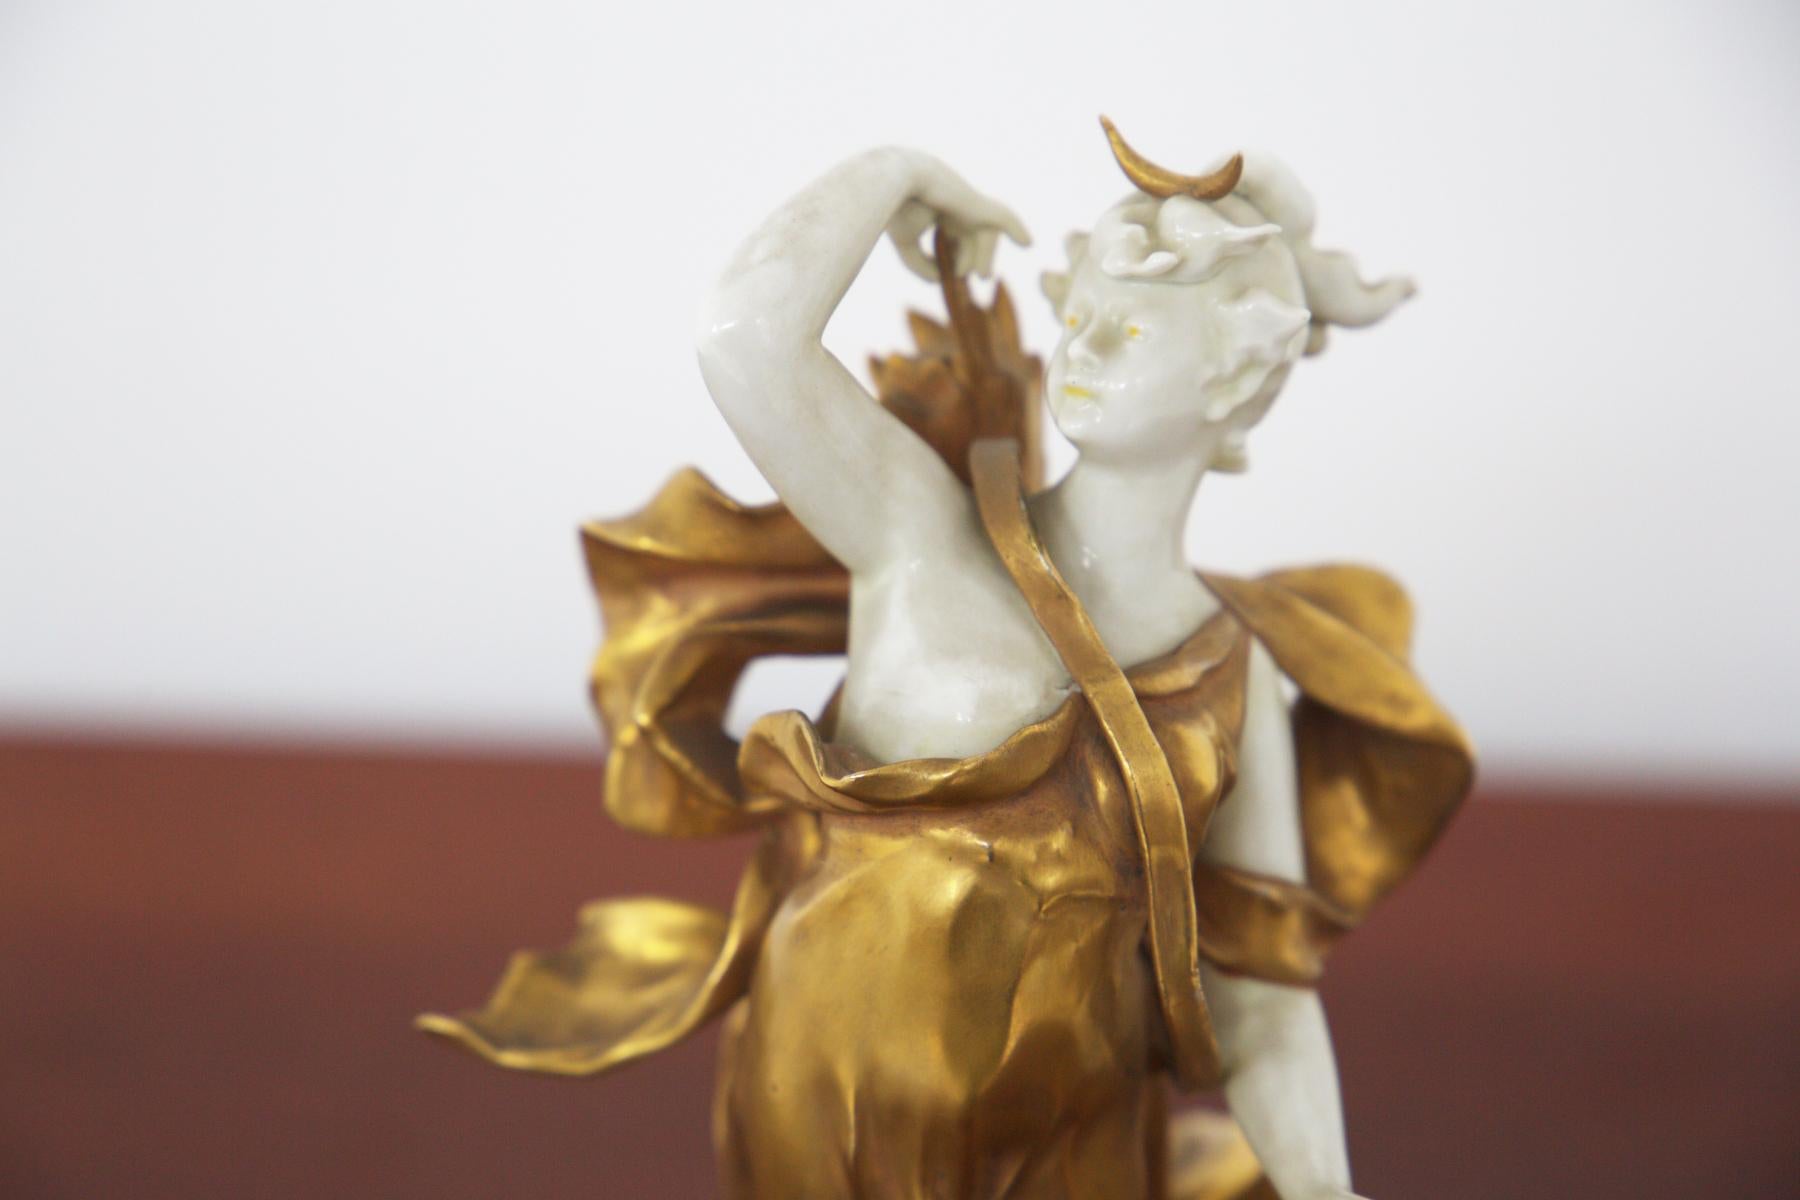 A splendid ceramic figurine, part of the 'Signs of the Zodiac' collection, made in the early 20th century from Capodimonte ceramic painted in gold.
Capodimonte is a type of Italian porcelain first developed in the 18th century. It is known for its